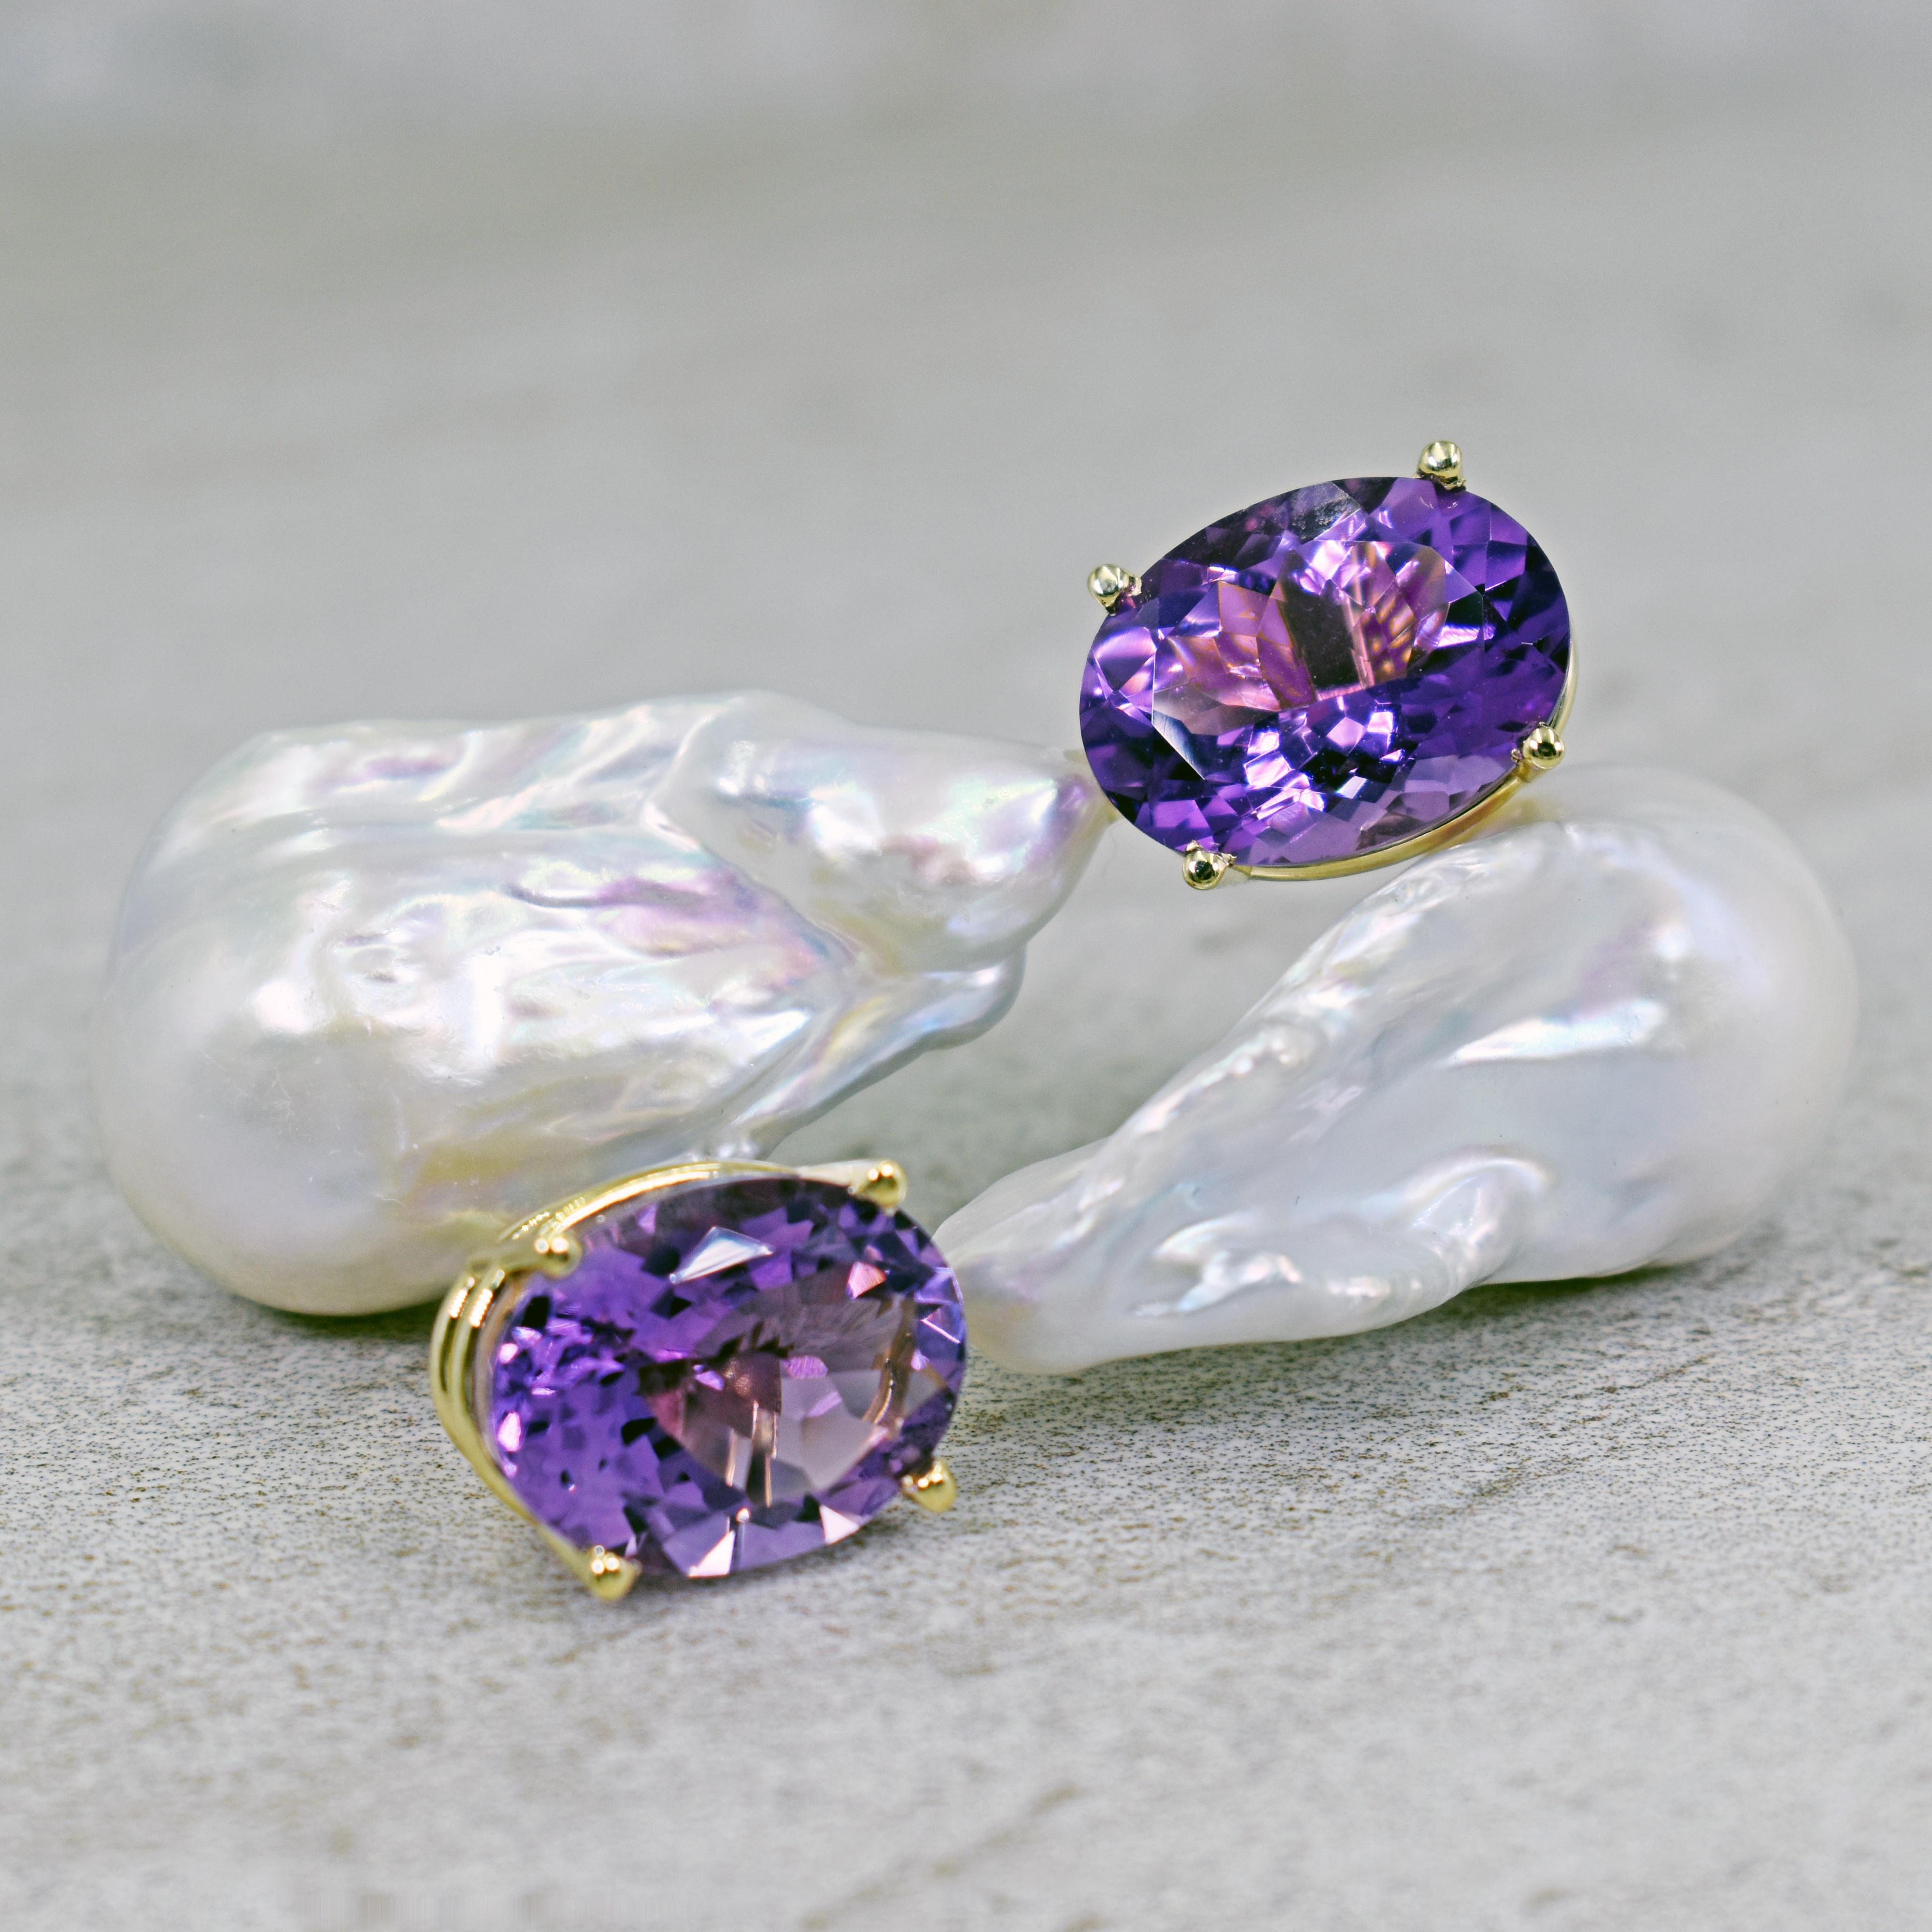 Gorgeous and unique 14k yellow gold stud earrings featuring two oval-cut Amethyst gemstones, totaling 16.79 carats, with large Freshwater Baroque Pearls. Stud earrings are 2.19 inches or 55 mm in length. These artisan statement earrings have